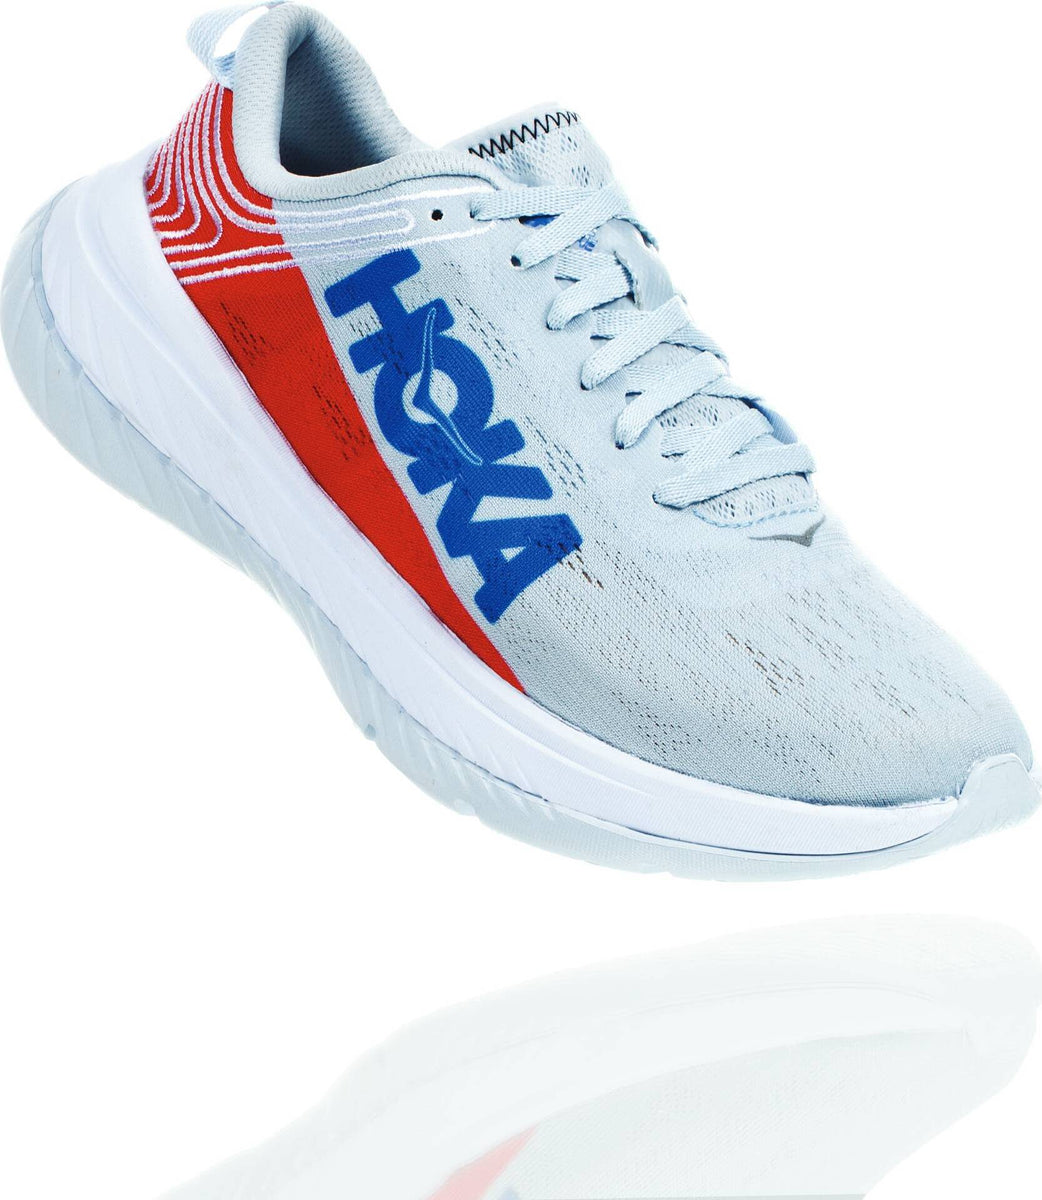 Hoka One One Carbon X Running Shoes - Women's | Altitude Sports